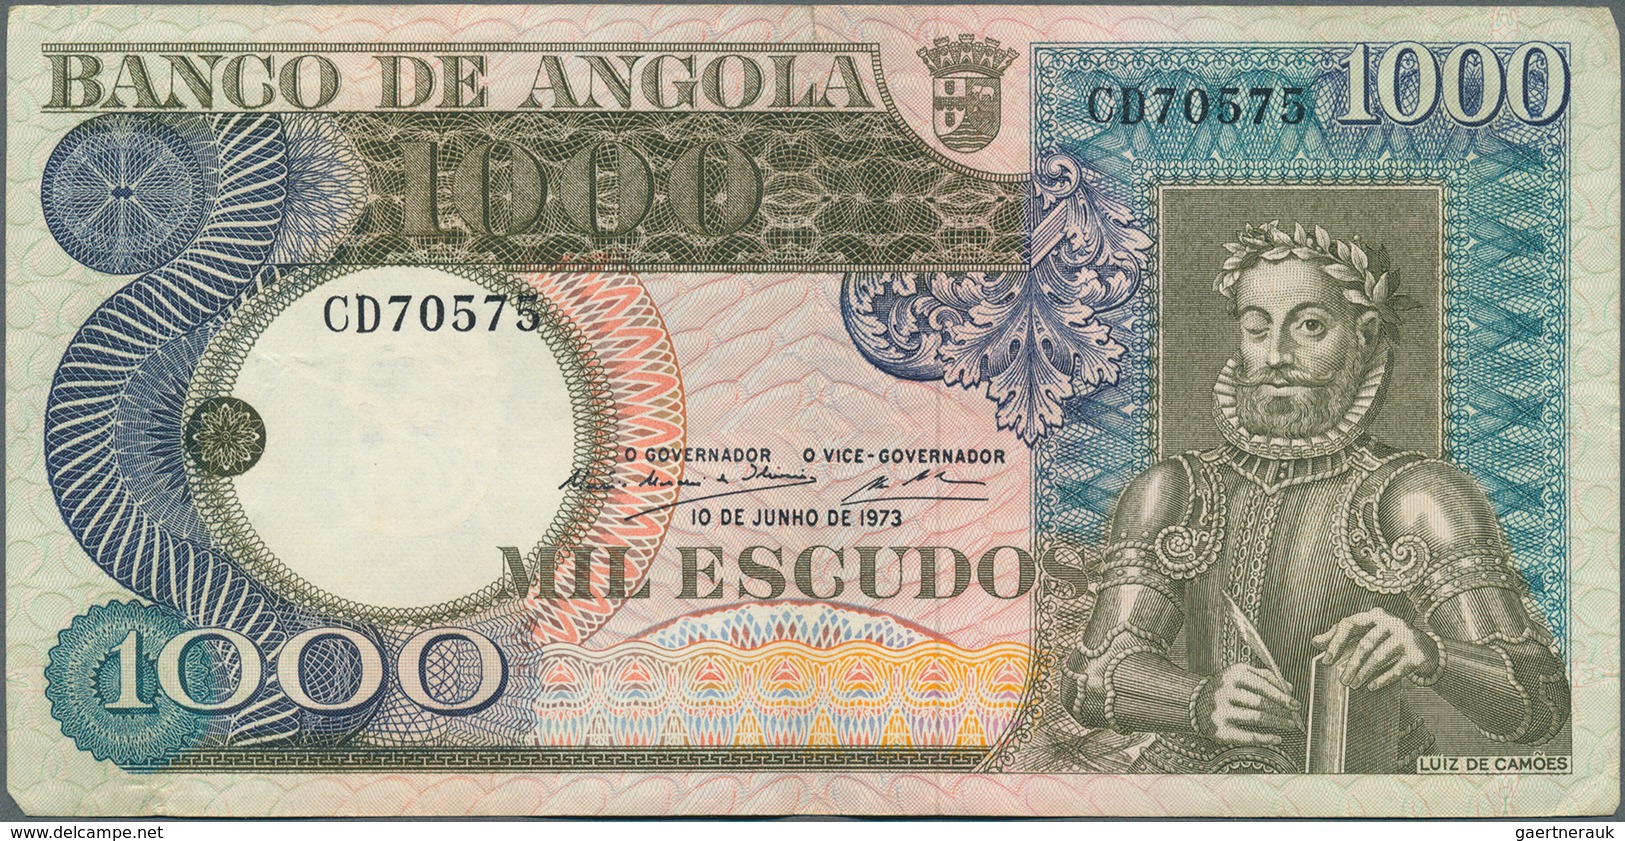 02711 Angola: Bundle Of 100 Non-consecutive Banknotes 1000 Escudos 1973 P. 108, All Notes Used With Light - Angola